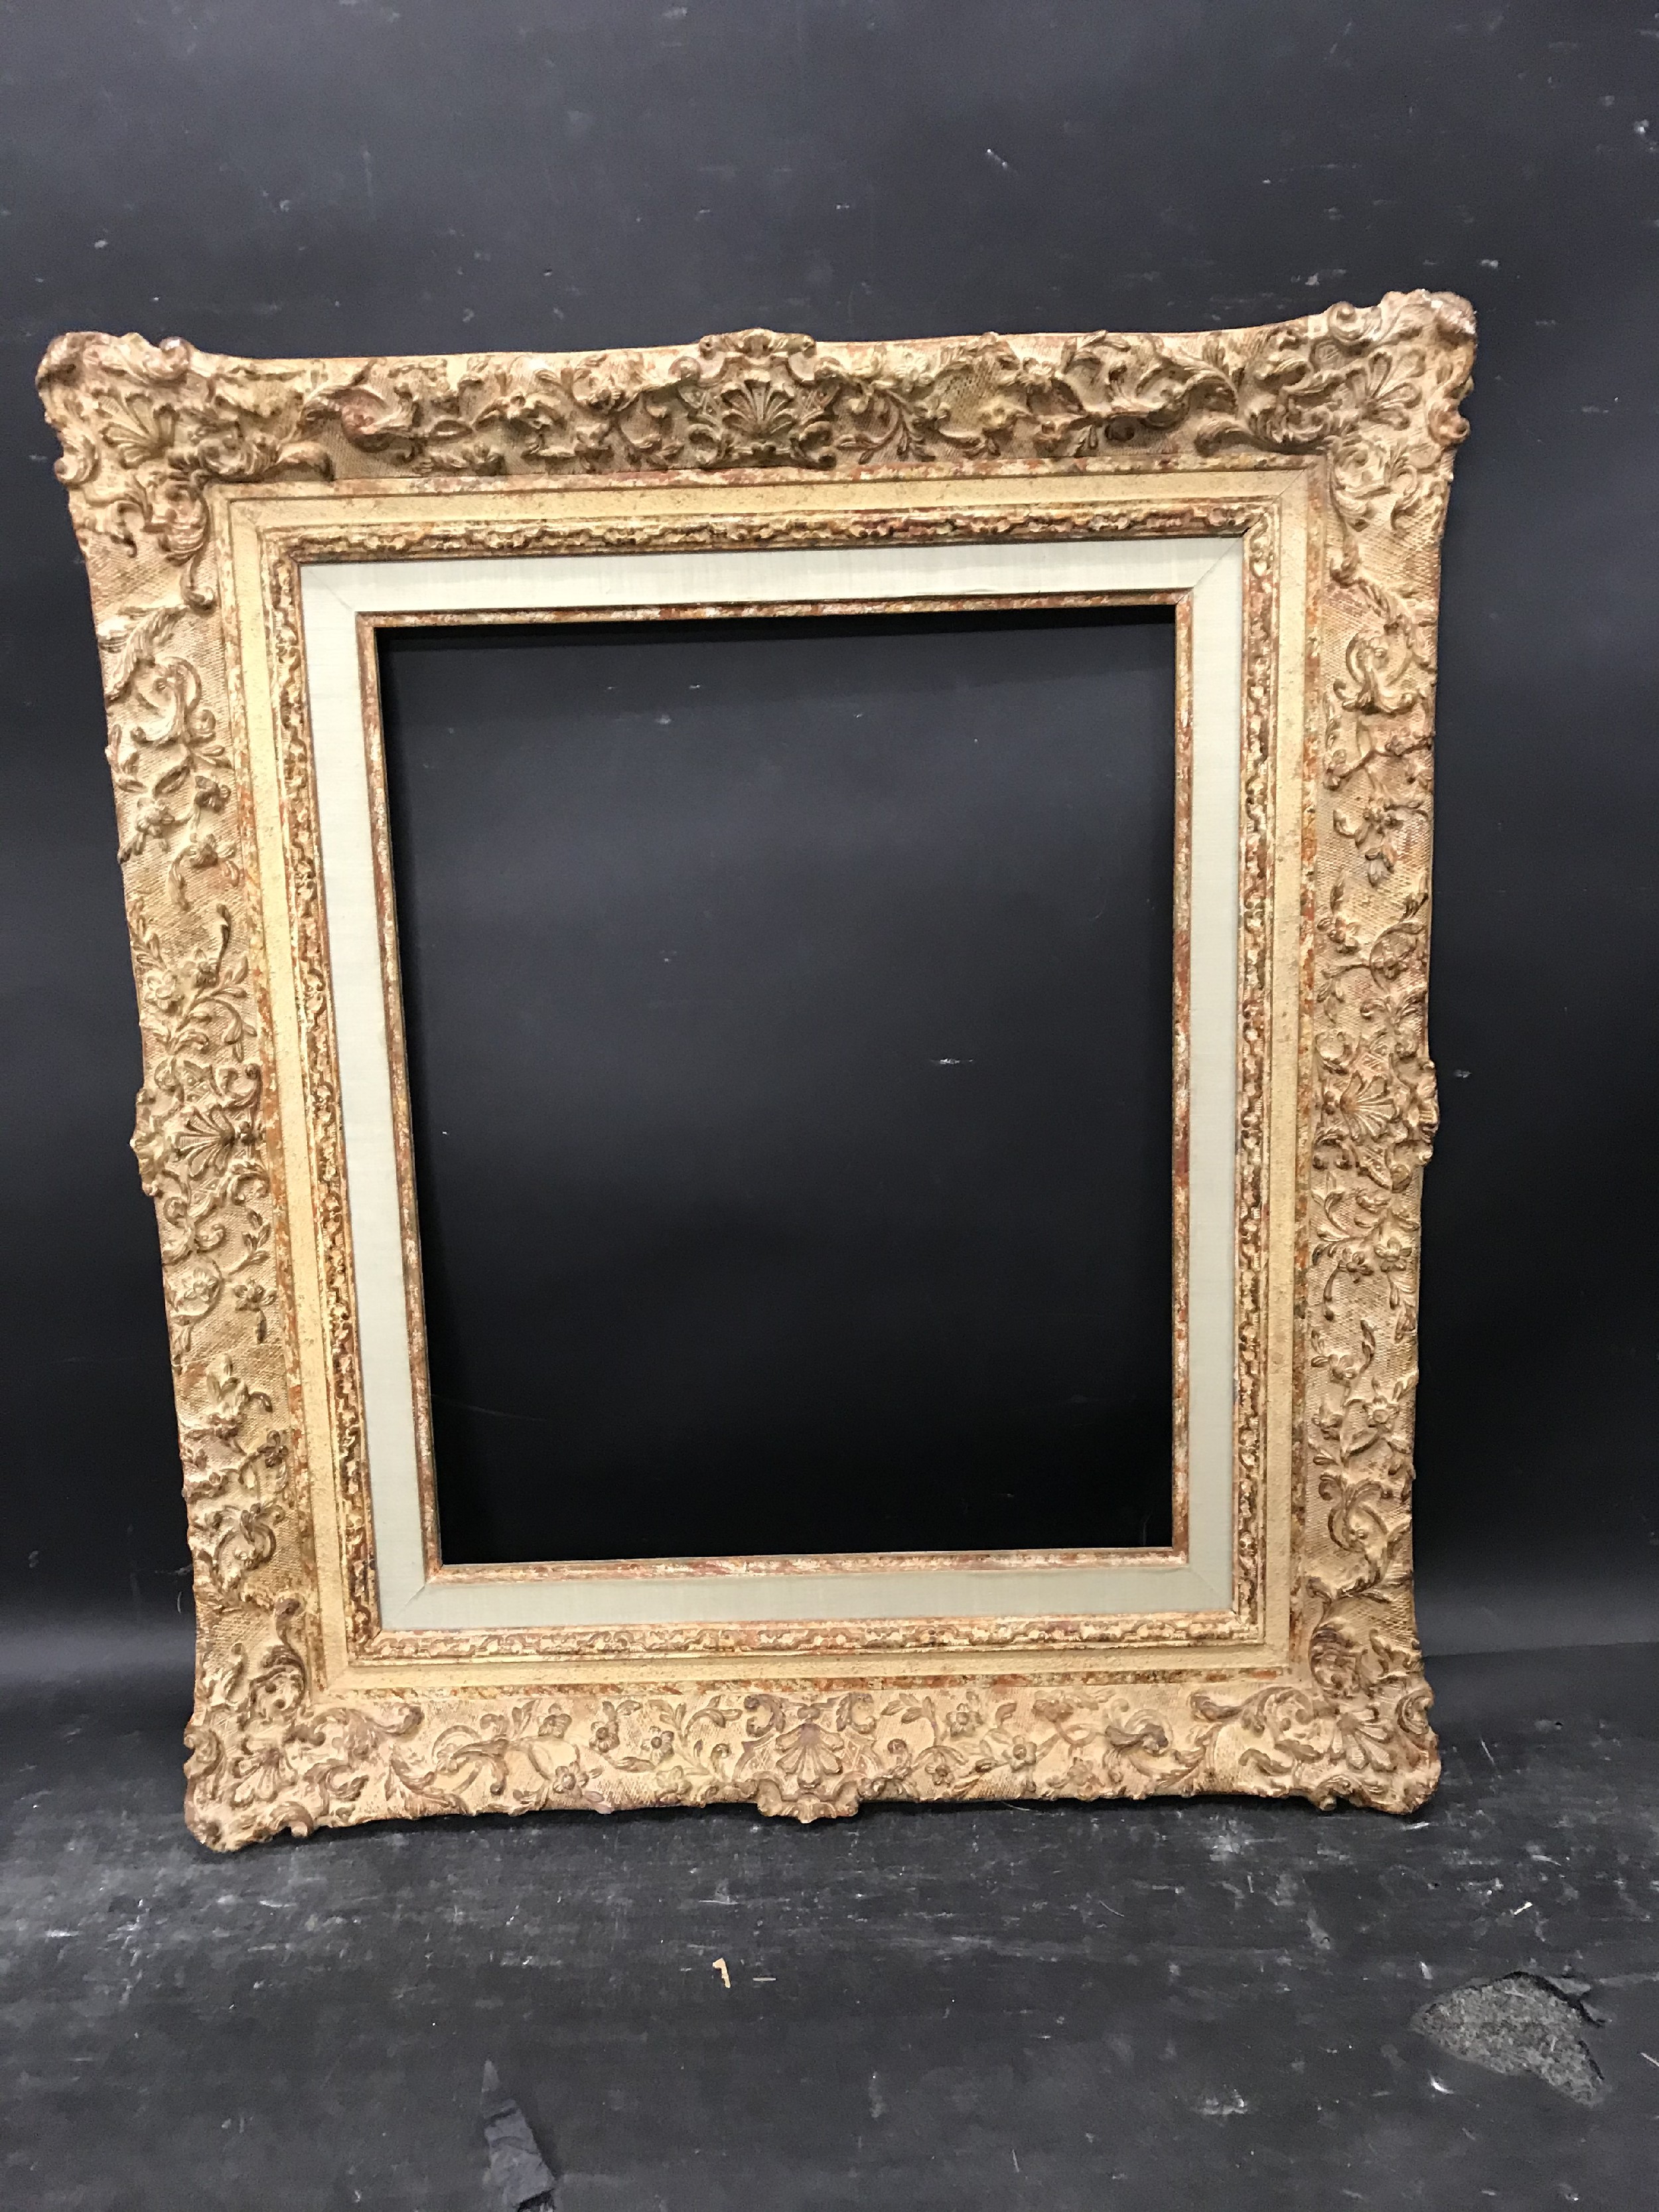 20th Century French School. A Painted Composition Frame, with fabric slip, 16.5" x 13.25", without - Image 2 of 3